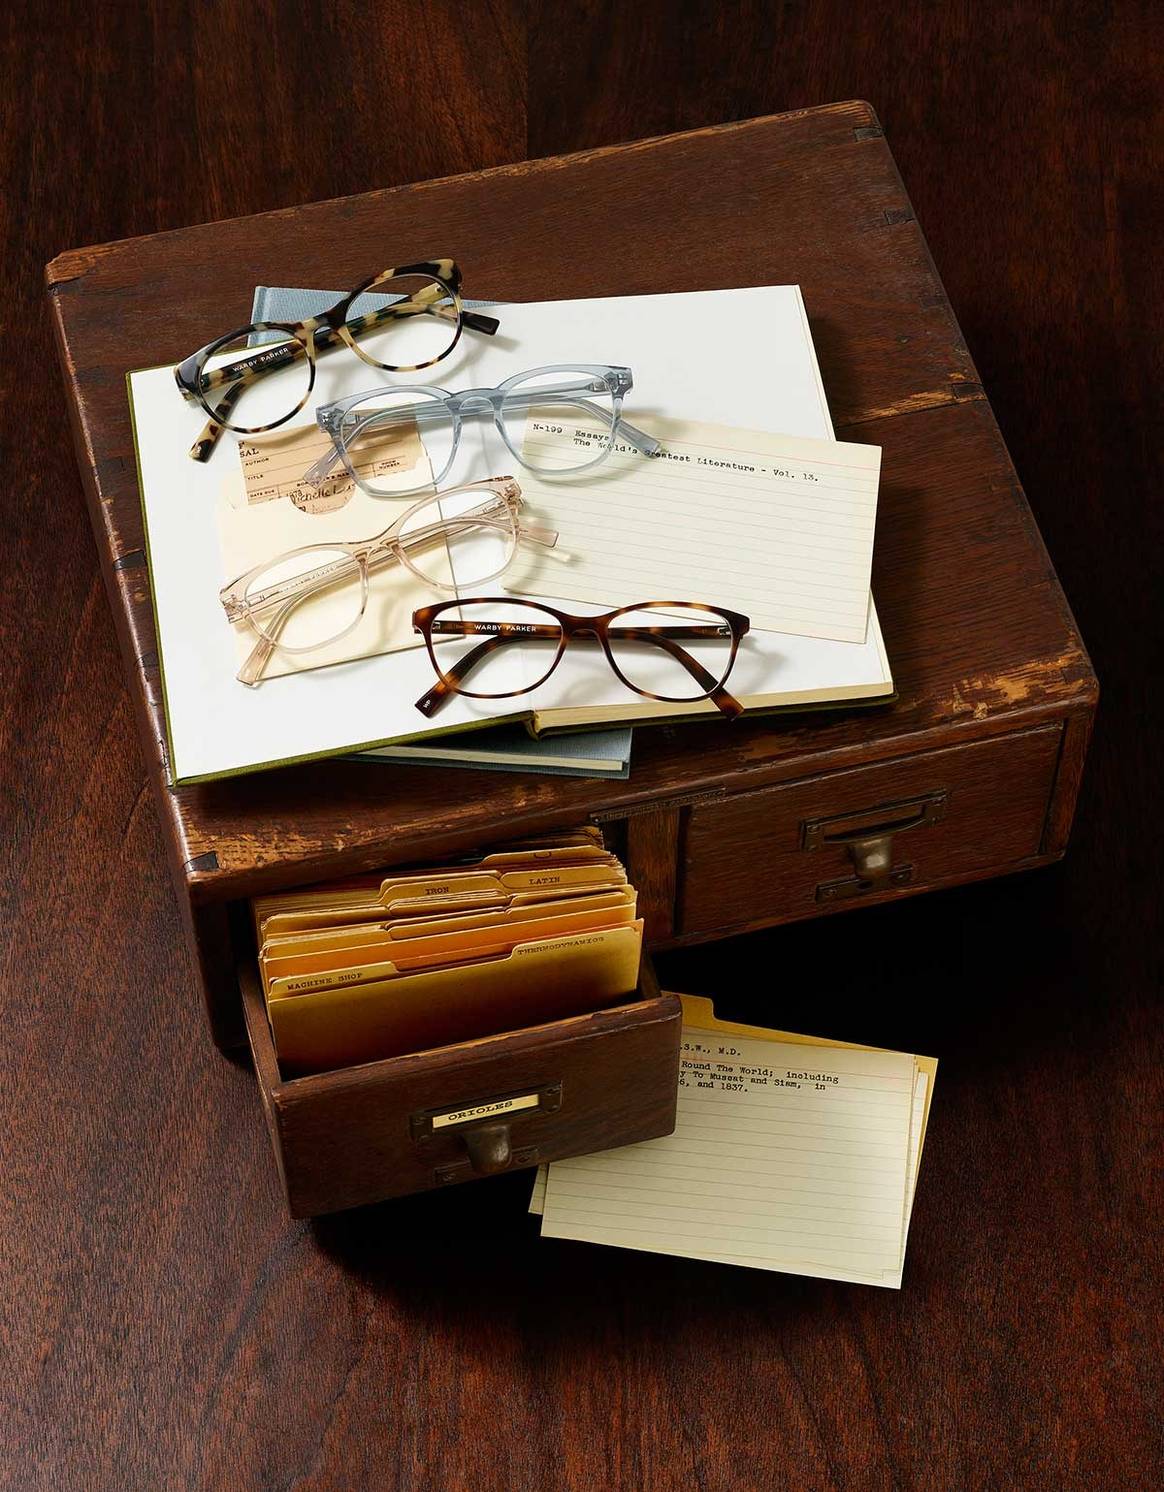 Warby Parker teams up with New York Public Library for Fall collection